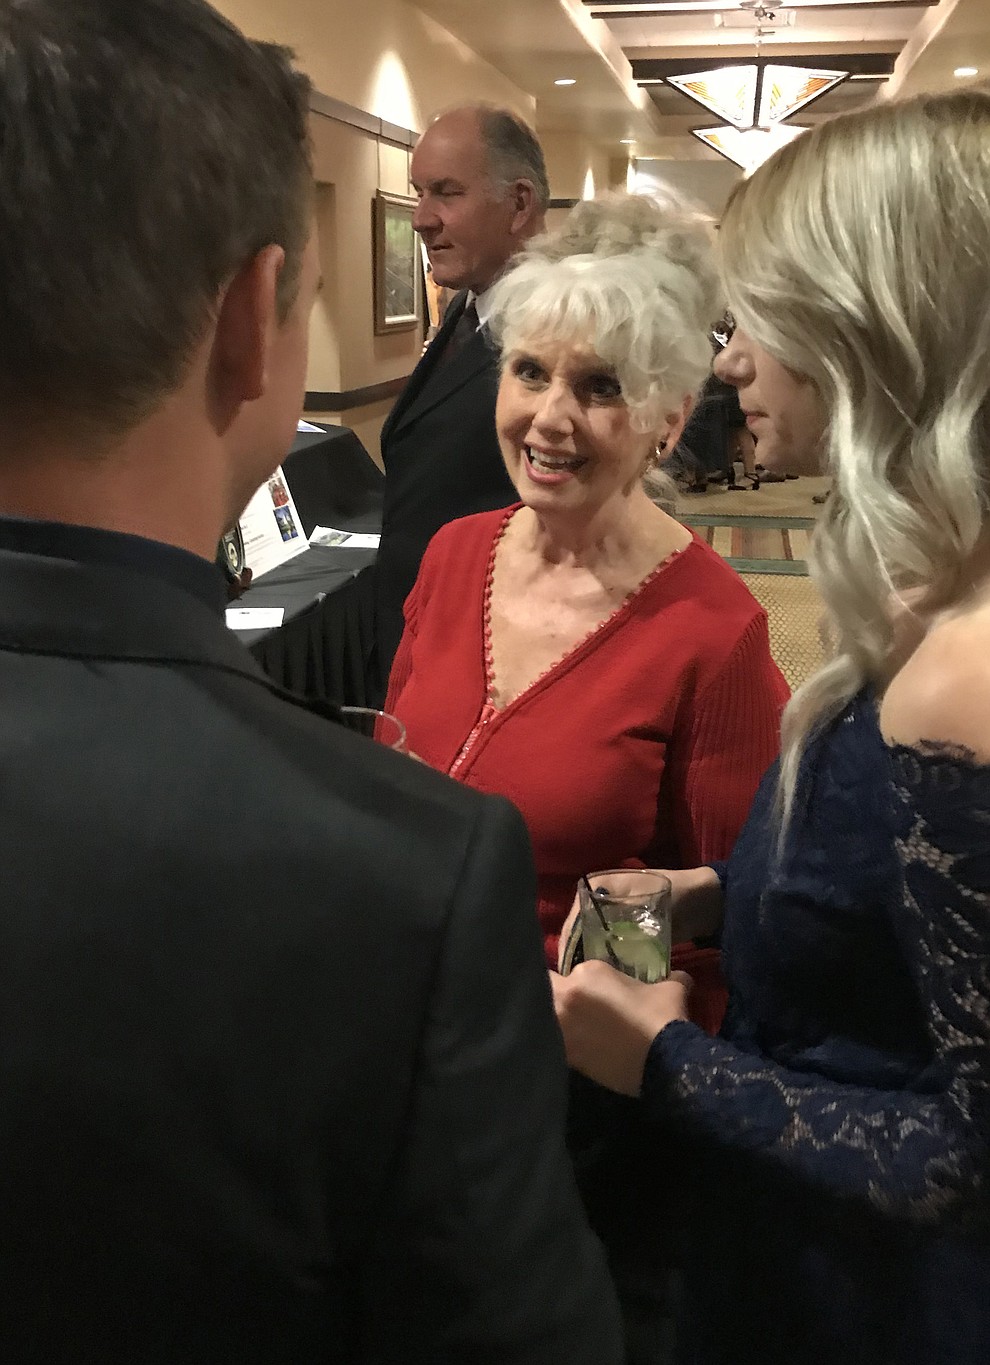 Alyce Ayers, director of Resource Development for Prescott Area Habitat for Humanity and chair of the 2017 Toolbelts & Tuxedos Gala Committee, talks with the event's guests on Saturday, Nov. 11, at the Prescott Resort. (Kelly Soldwedel/PNI)